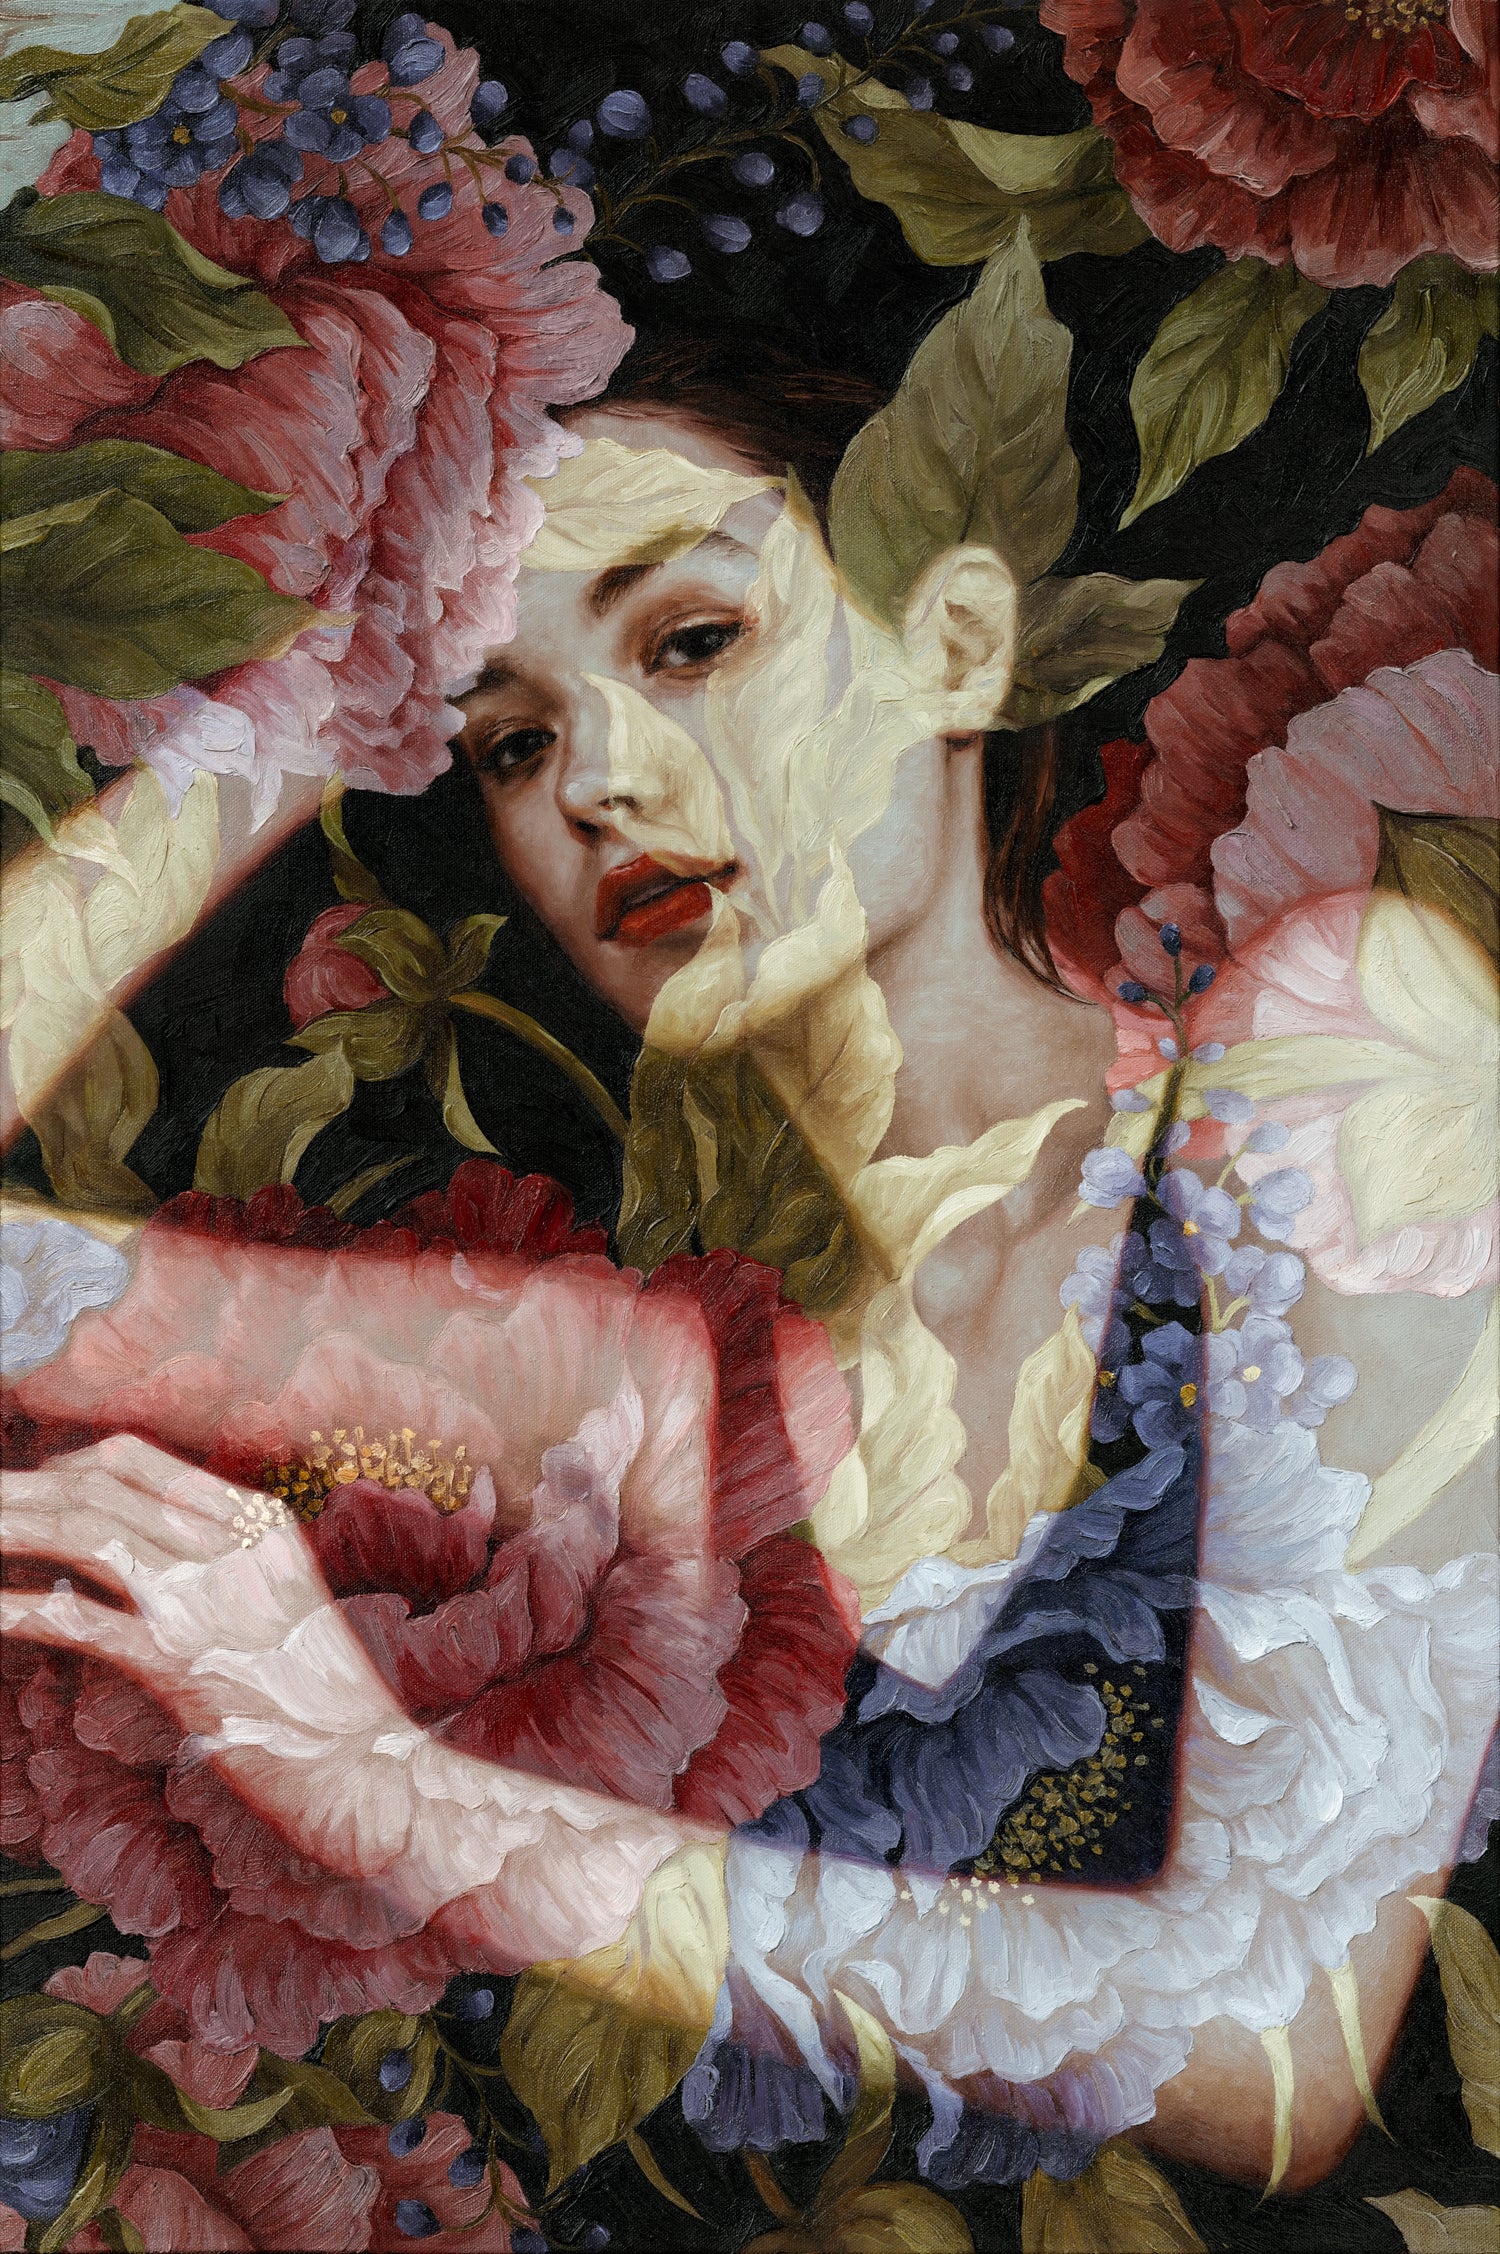 Romantic double exposure floral portrait by Jess Currier, showcasing an innovative blend of realism and impressionism.